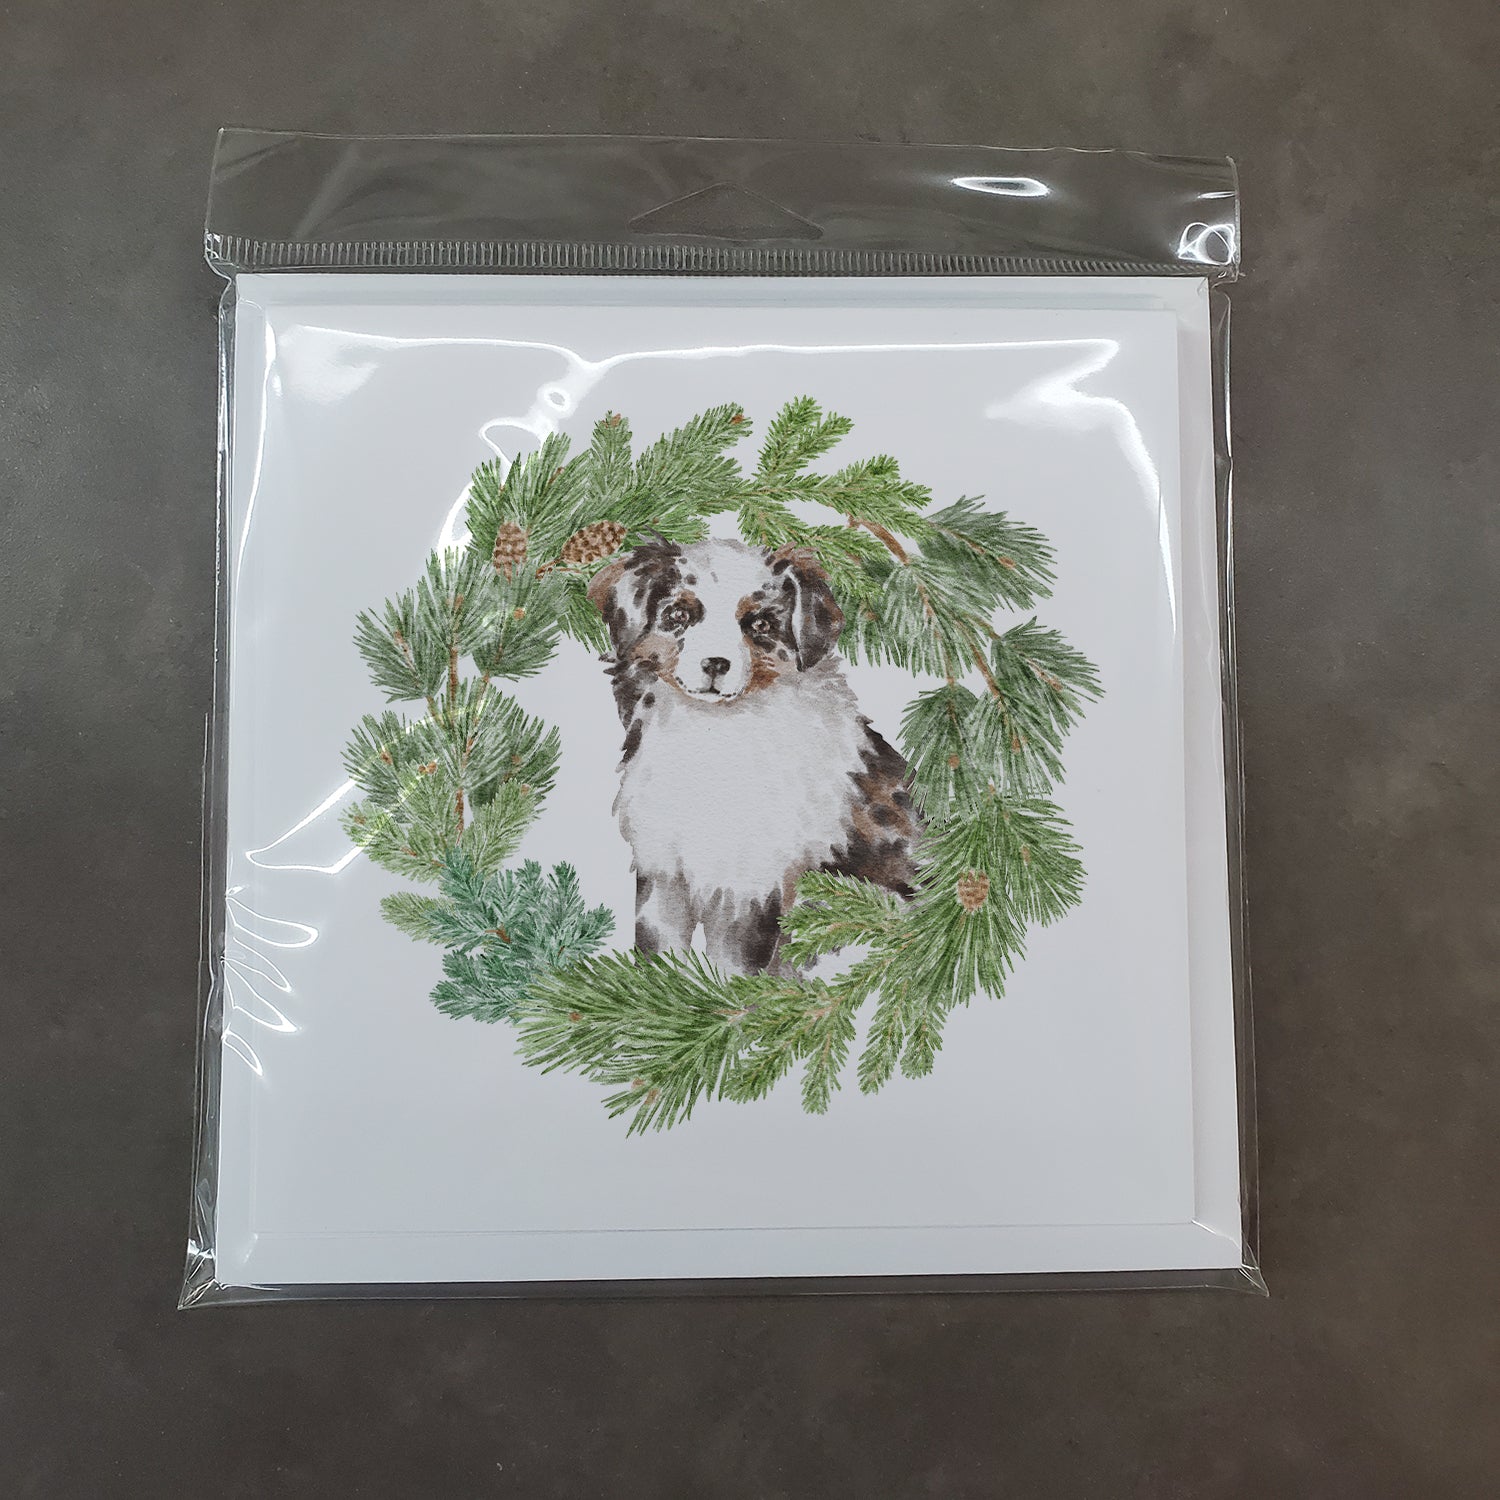 Australian Shepherd Puppy Blue Merle with Christmas Wreath Square Greeting Cards and Envelopes Pack of 8 - the-store.com